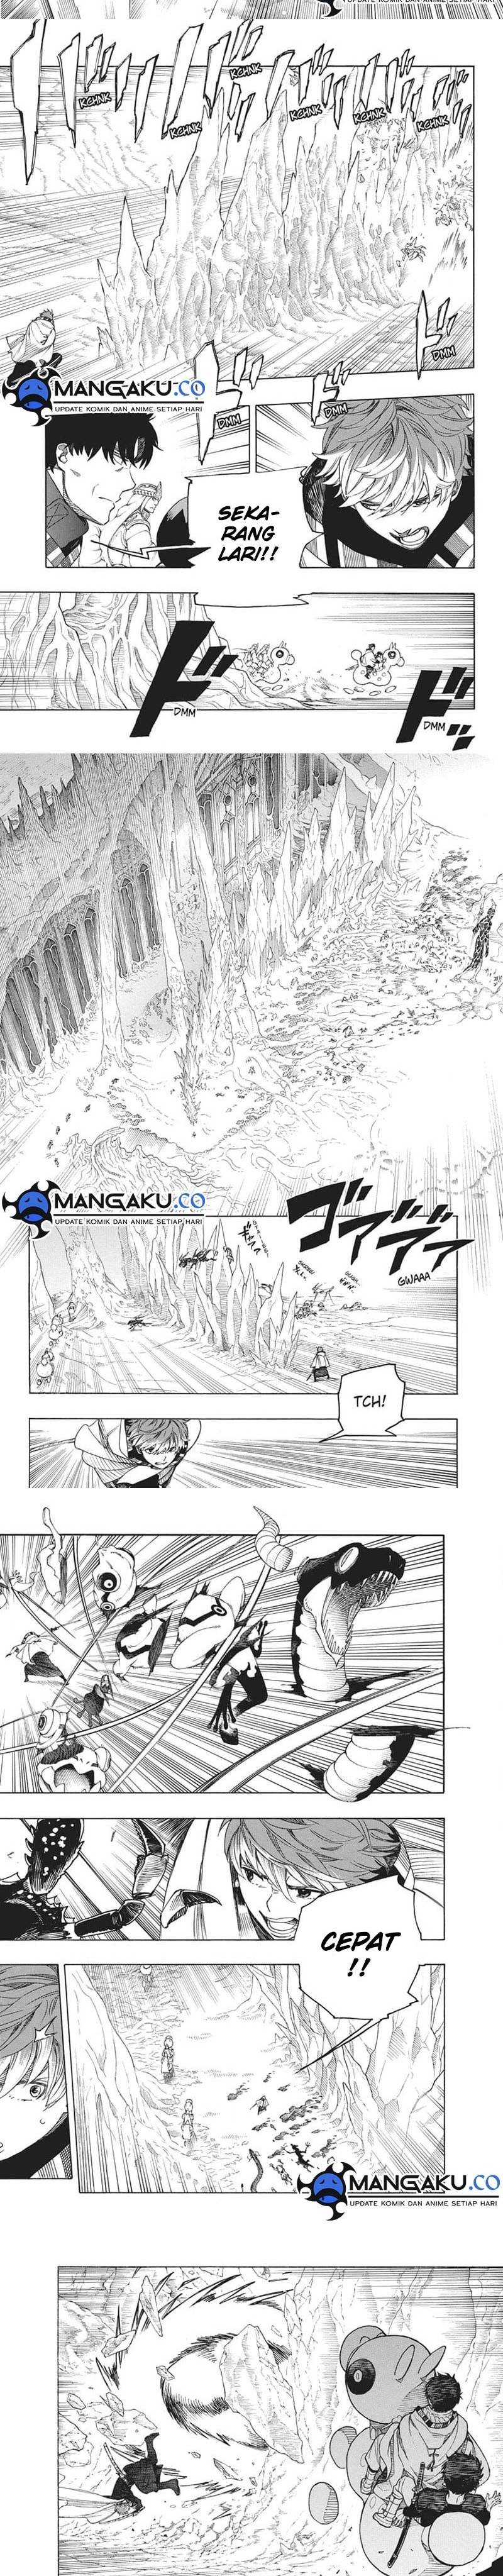 Ao no Exorcist Chapter 146.2